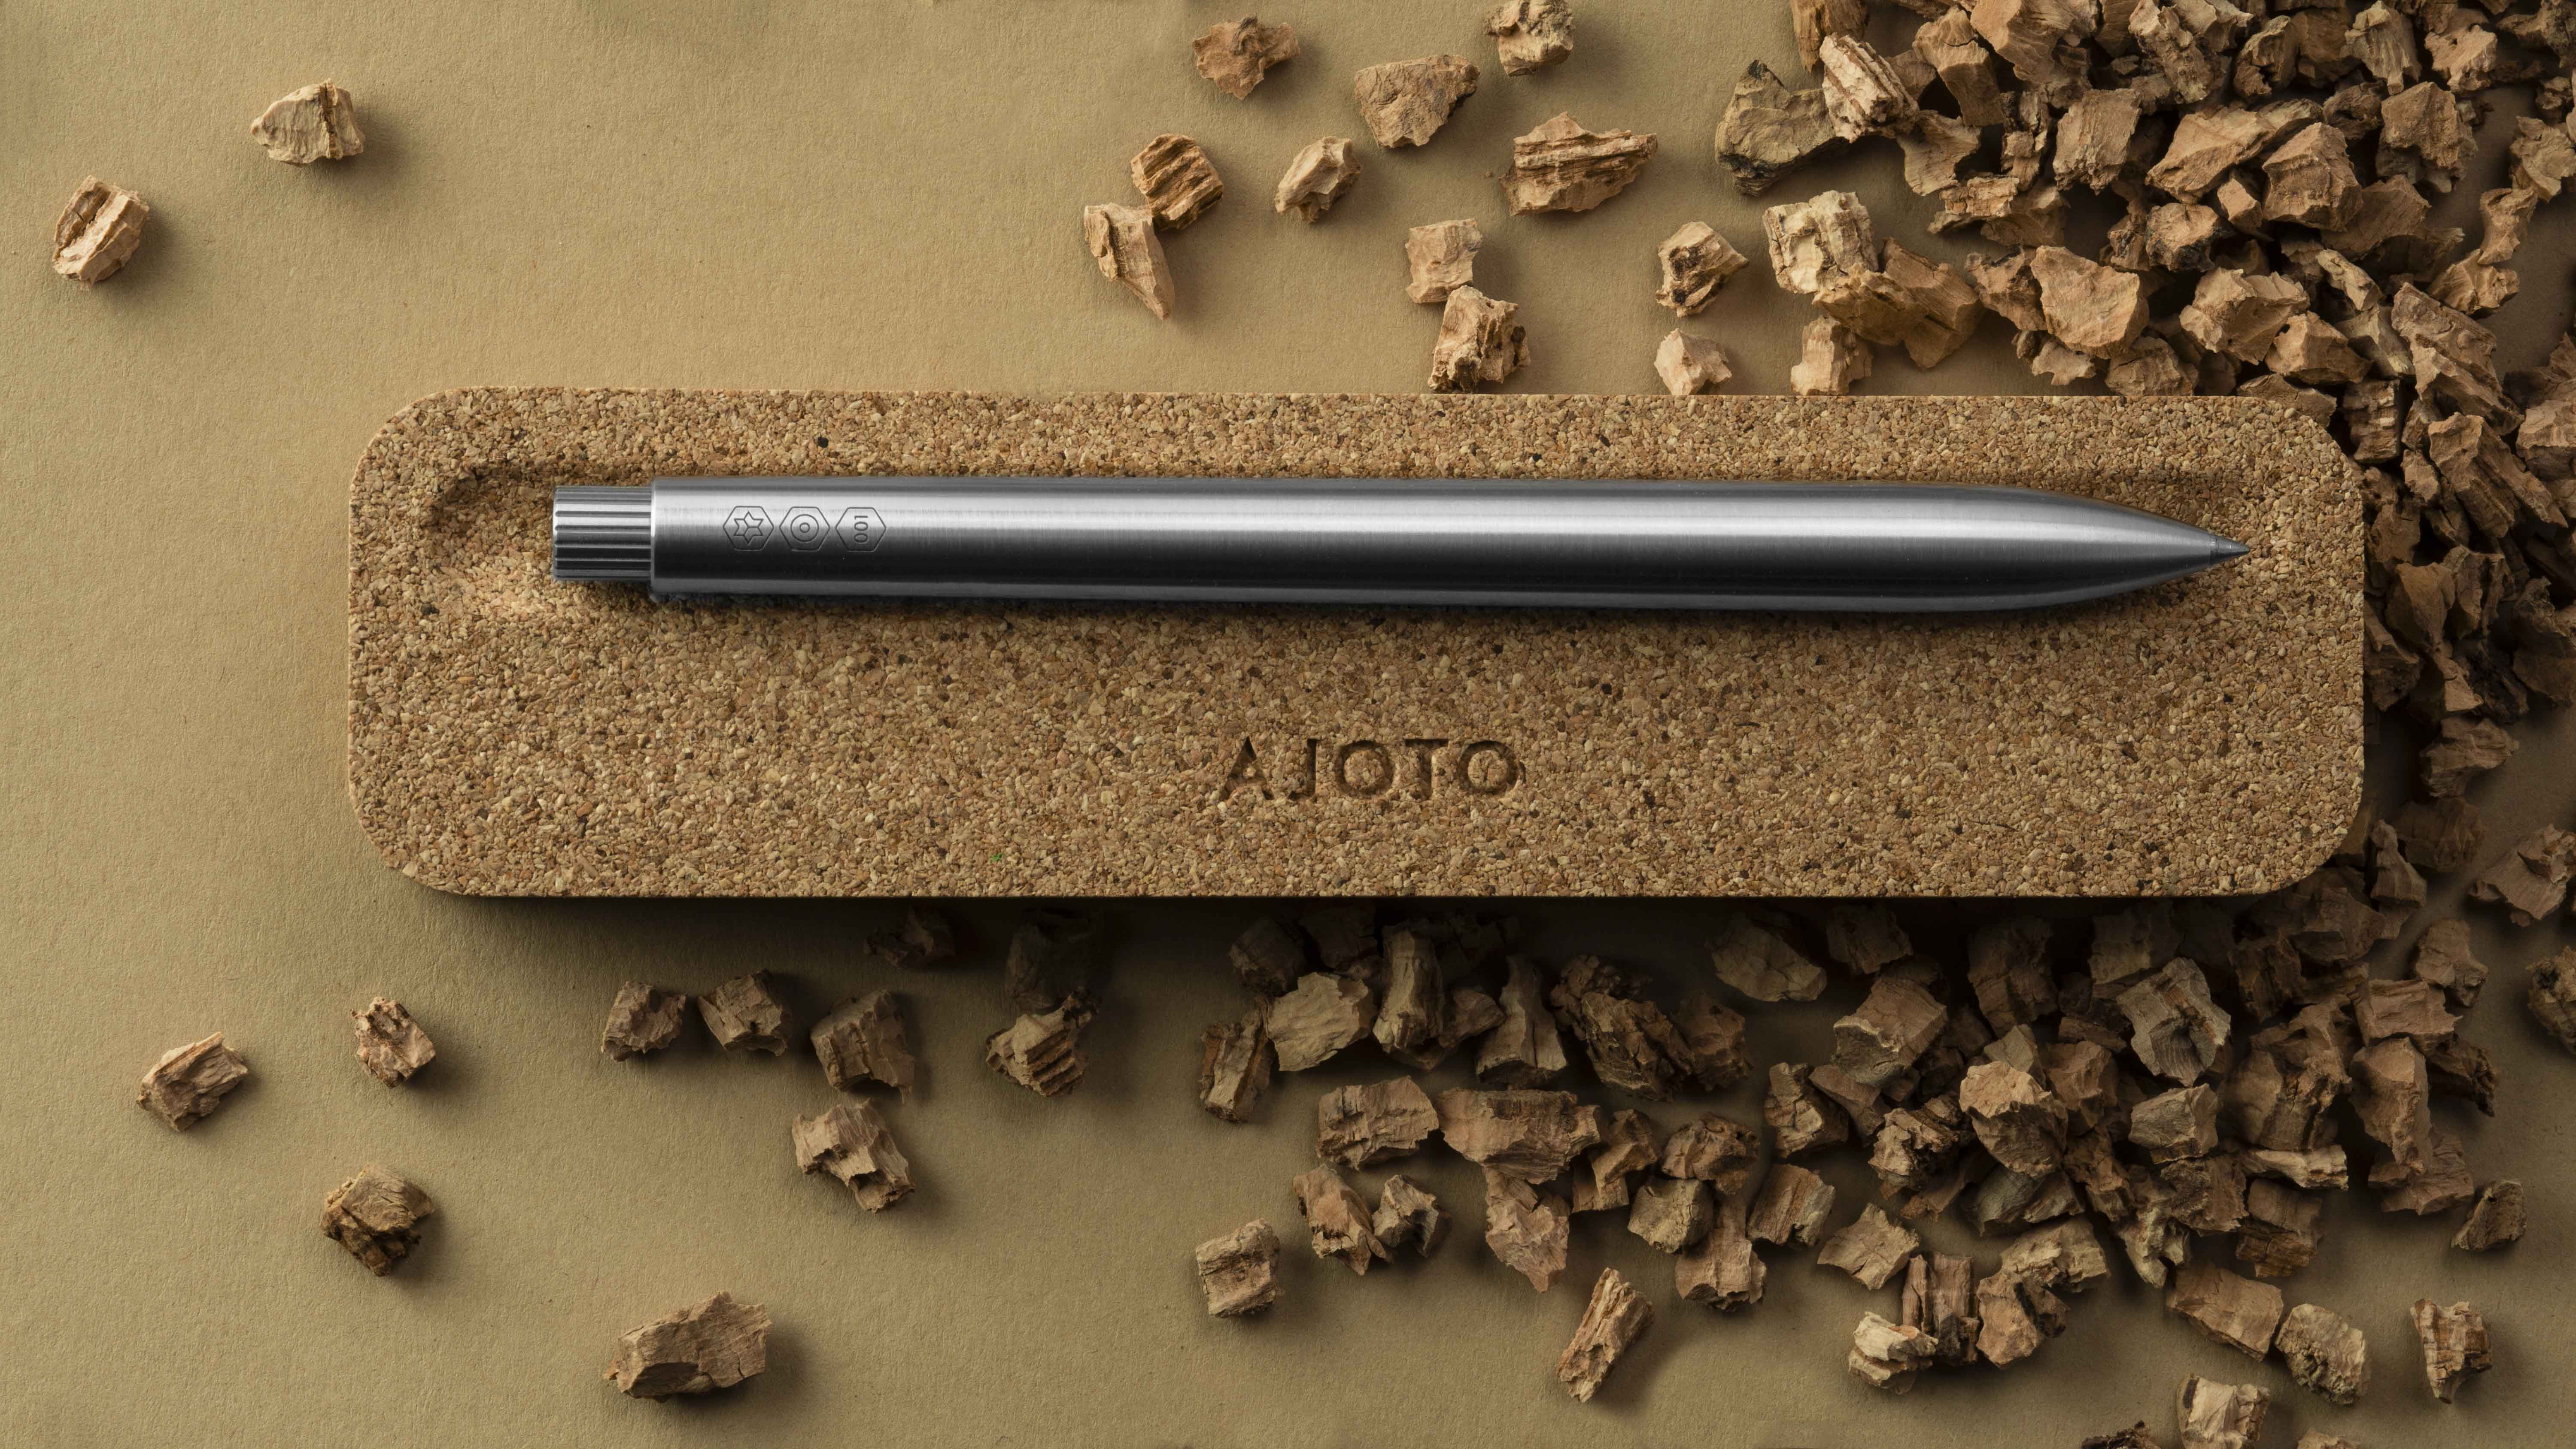 AJOTO: This Pen’s Cork Packaging Is Functional And Sleek